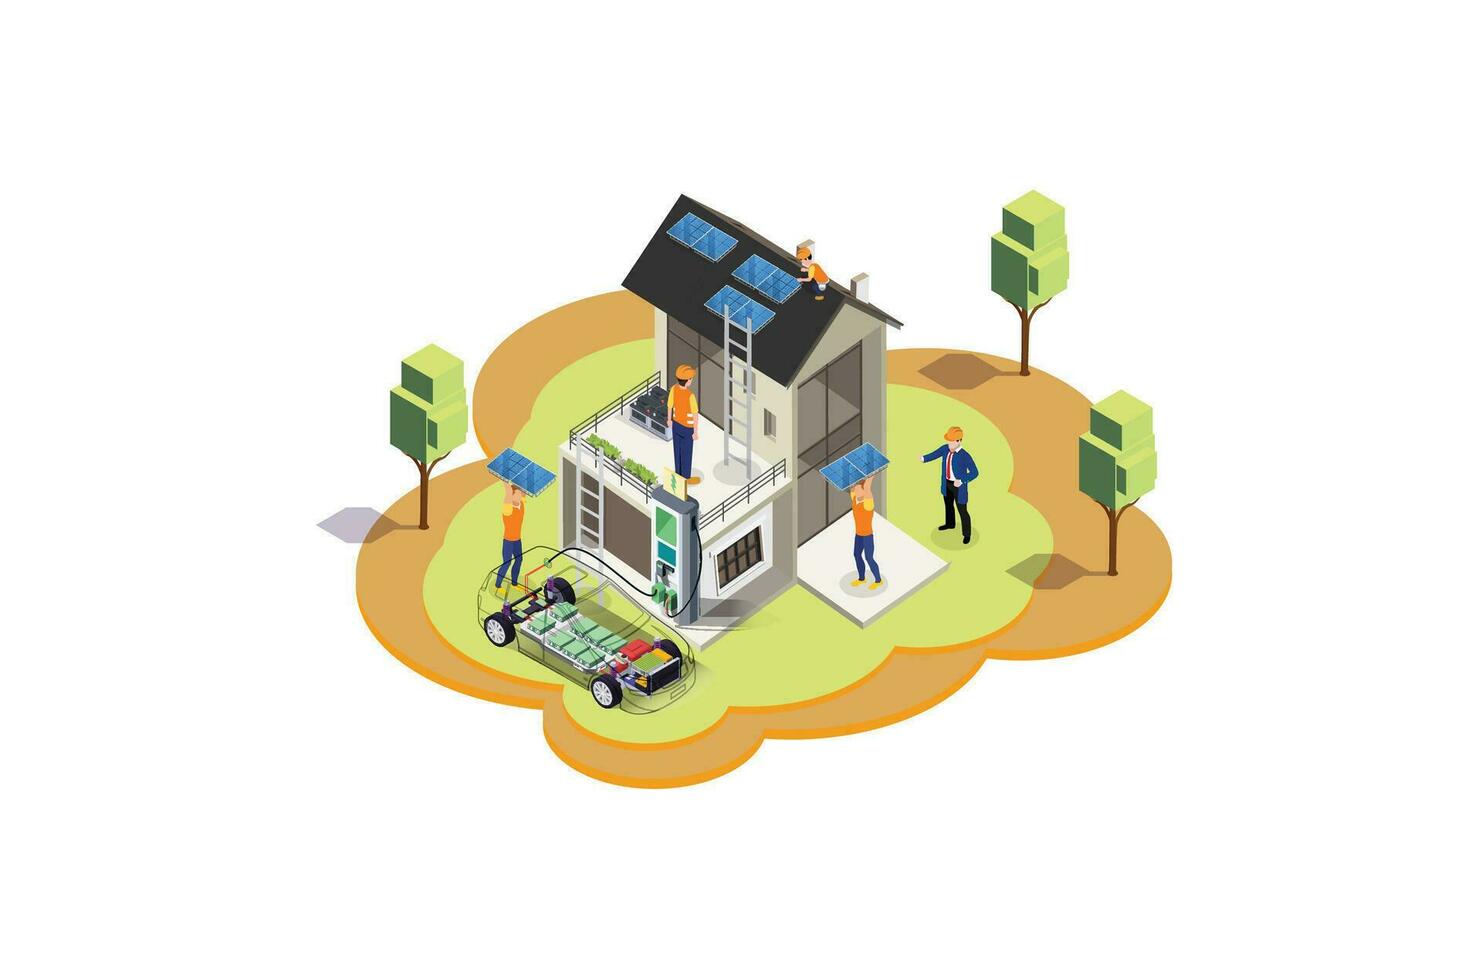 Isometric illustration of charging an electric car battery at home using solar panels, Suitable for Diagrams, Infographics And Other Graphic Related Assets vector